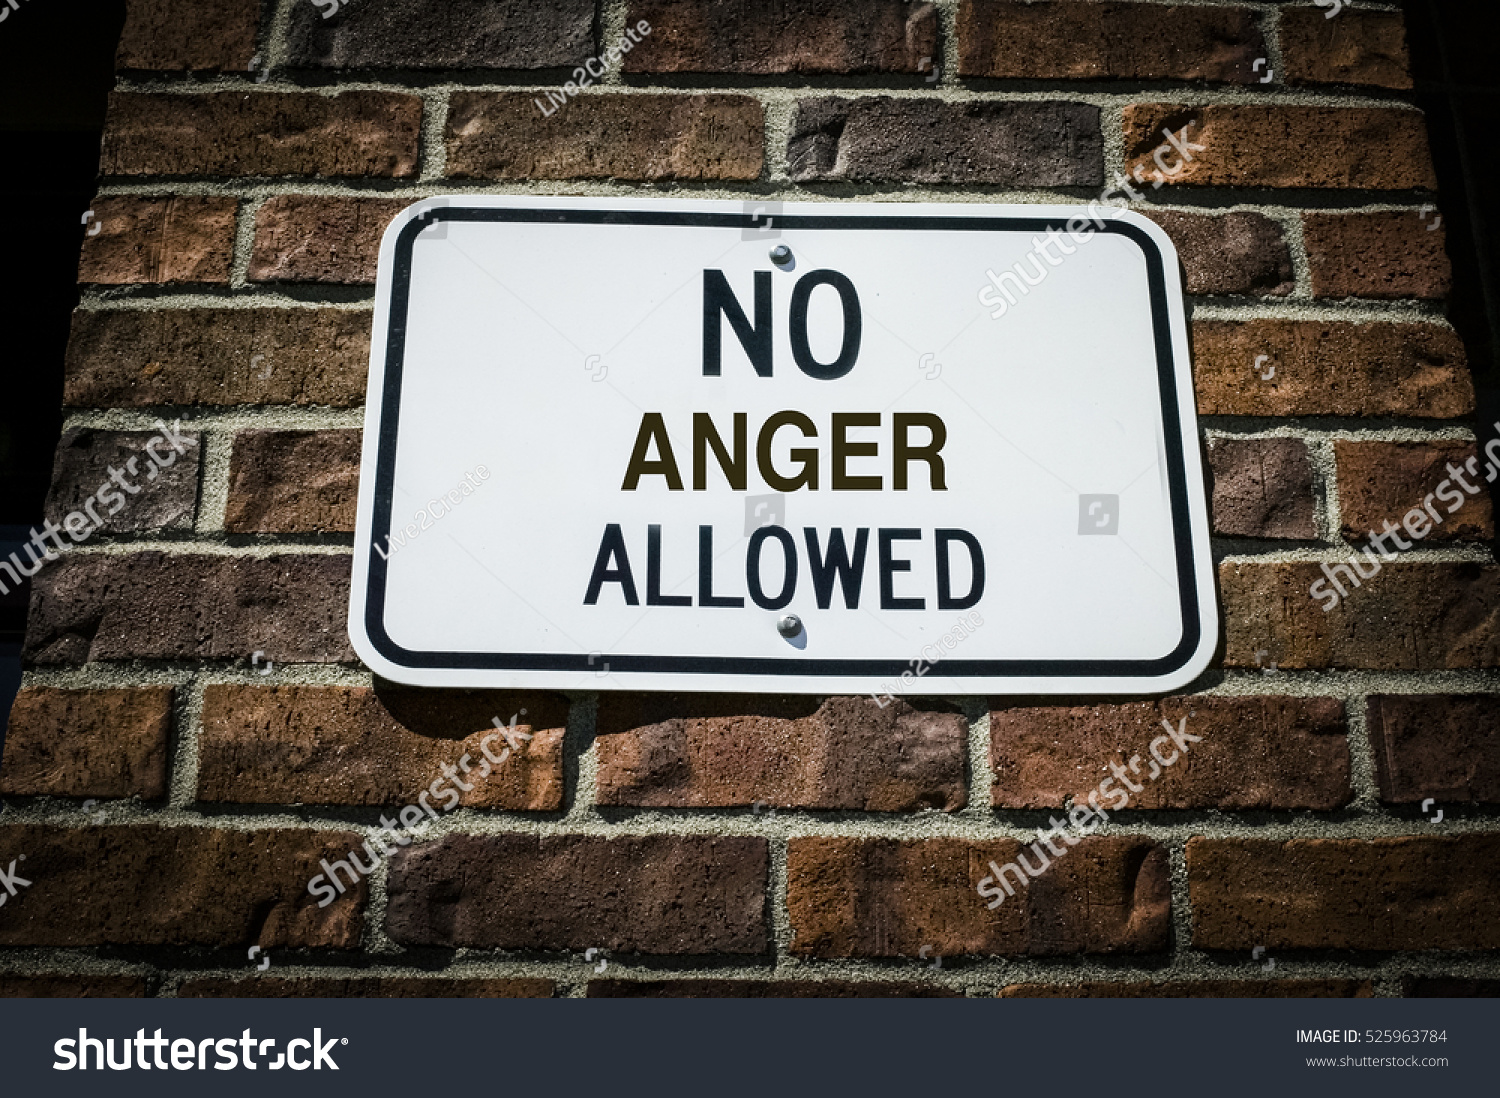 stock-photo-no-anger-allowed-sign-on-a-brick-wall-525963784.jpg